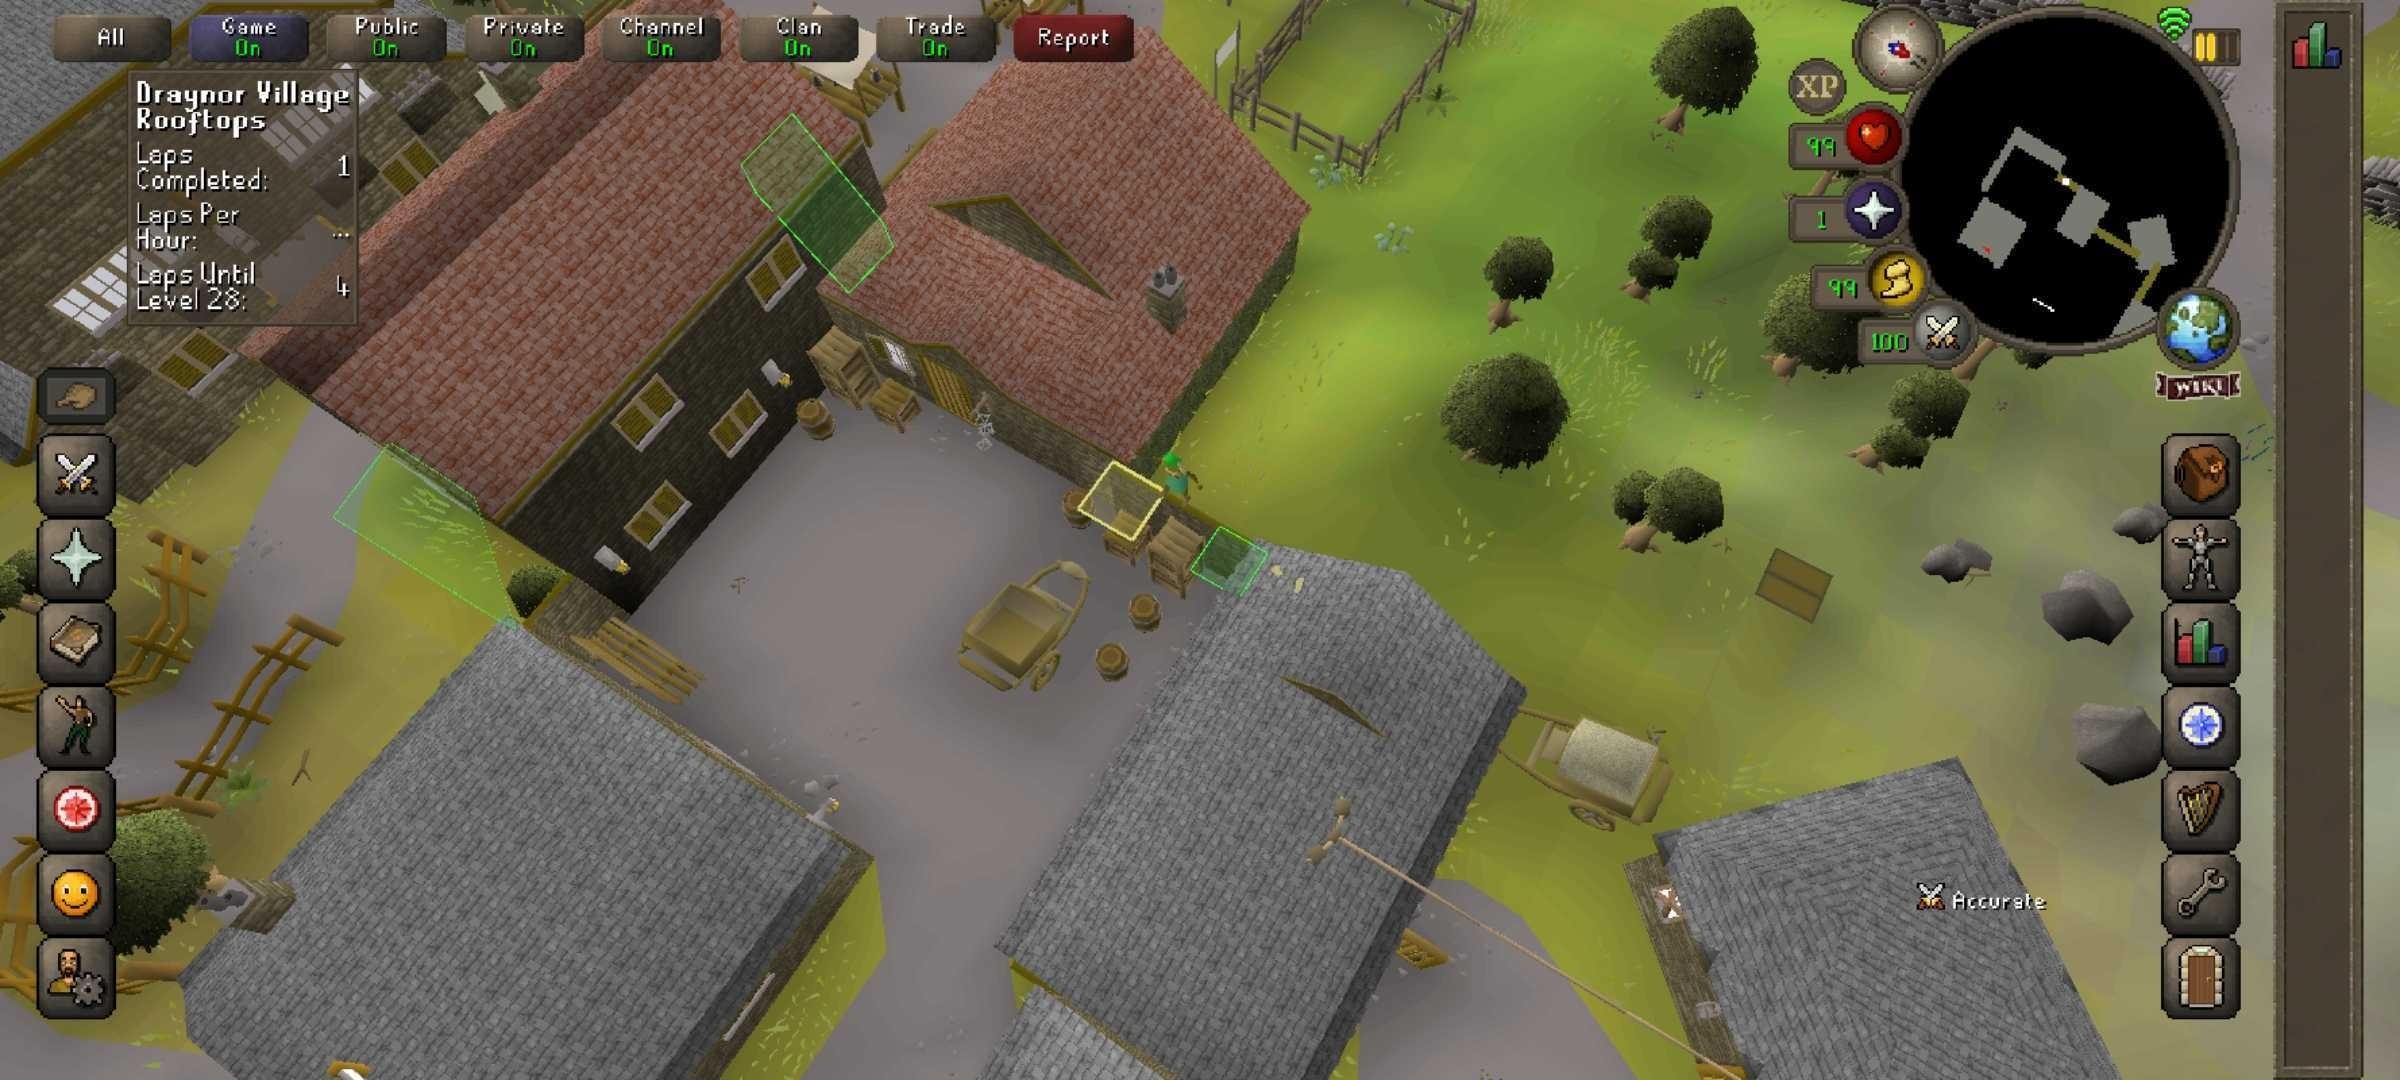 Android Beta Signup & Small QoL Changes - Weekly Game Update (November 3rd)  · Old School RuneScape update for 3 November 2021 · SteamDB